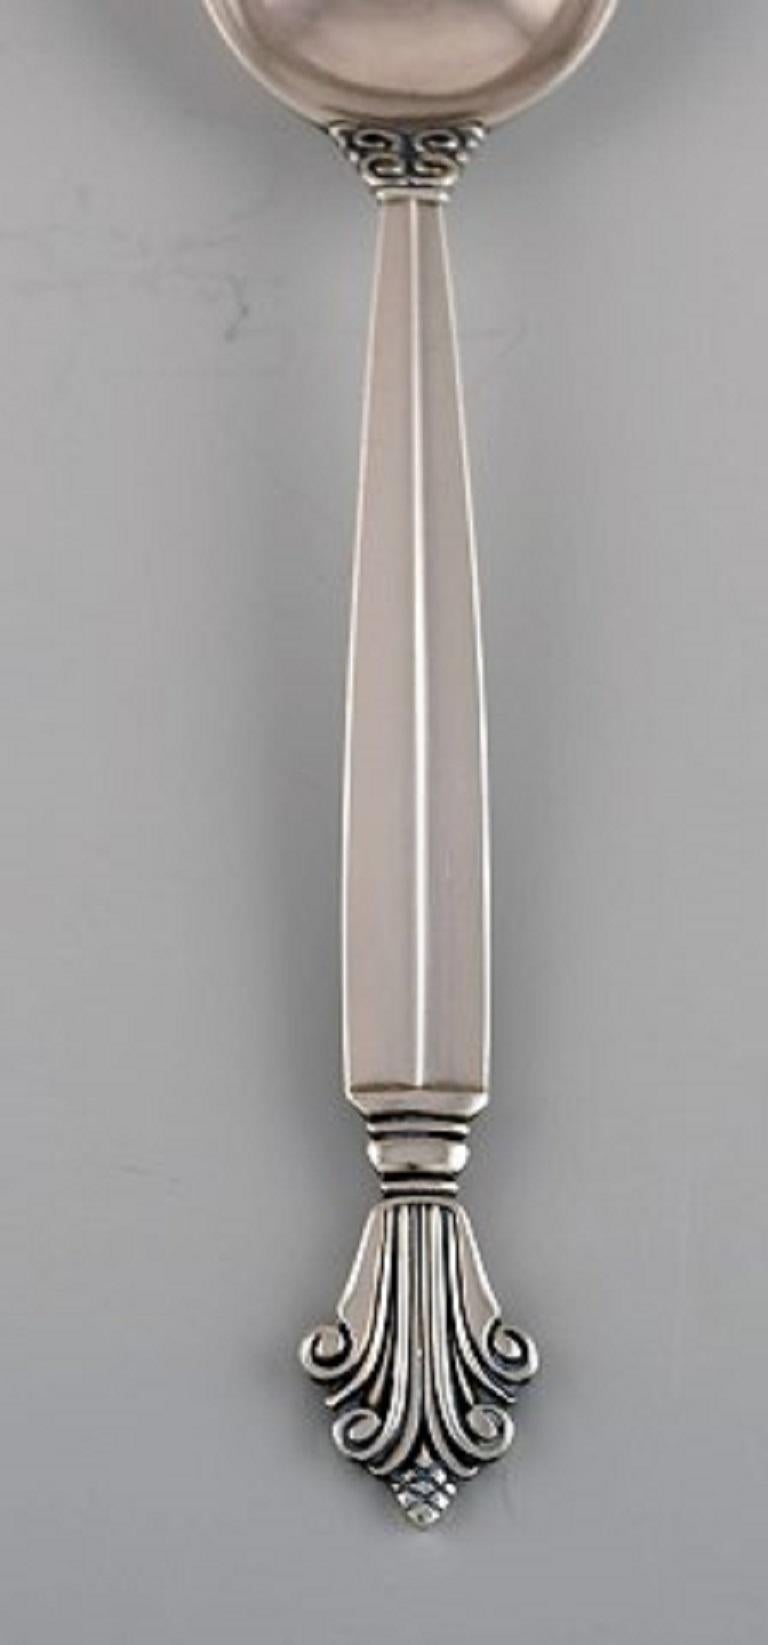 Georg Jensen Acanthus spoon in sterling silver.
Measures: Length 15 cm.
Stamped.
In excellent condition.
Our skilled Georg Jensen silversmith / jeweler can polish all silver and gold so that it appears as new. The price is very reasonable.